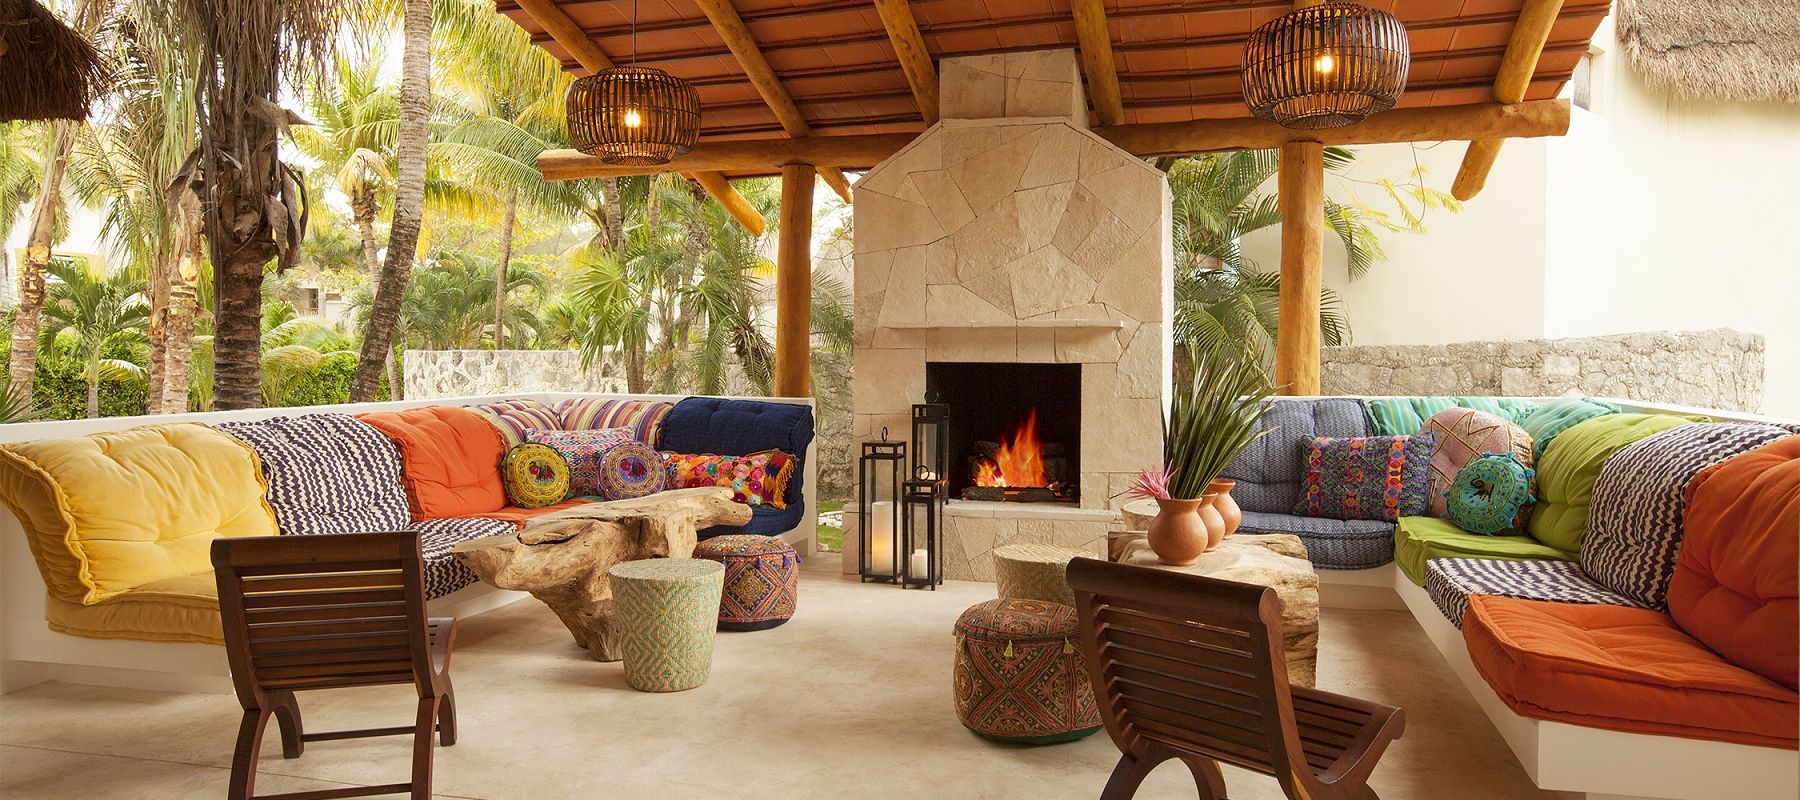  Welcoming outdoor lobby with authentic Mayan furnishings at Mahekal Beach Resort